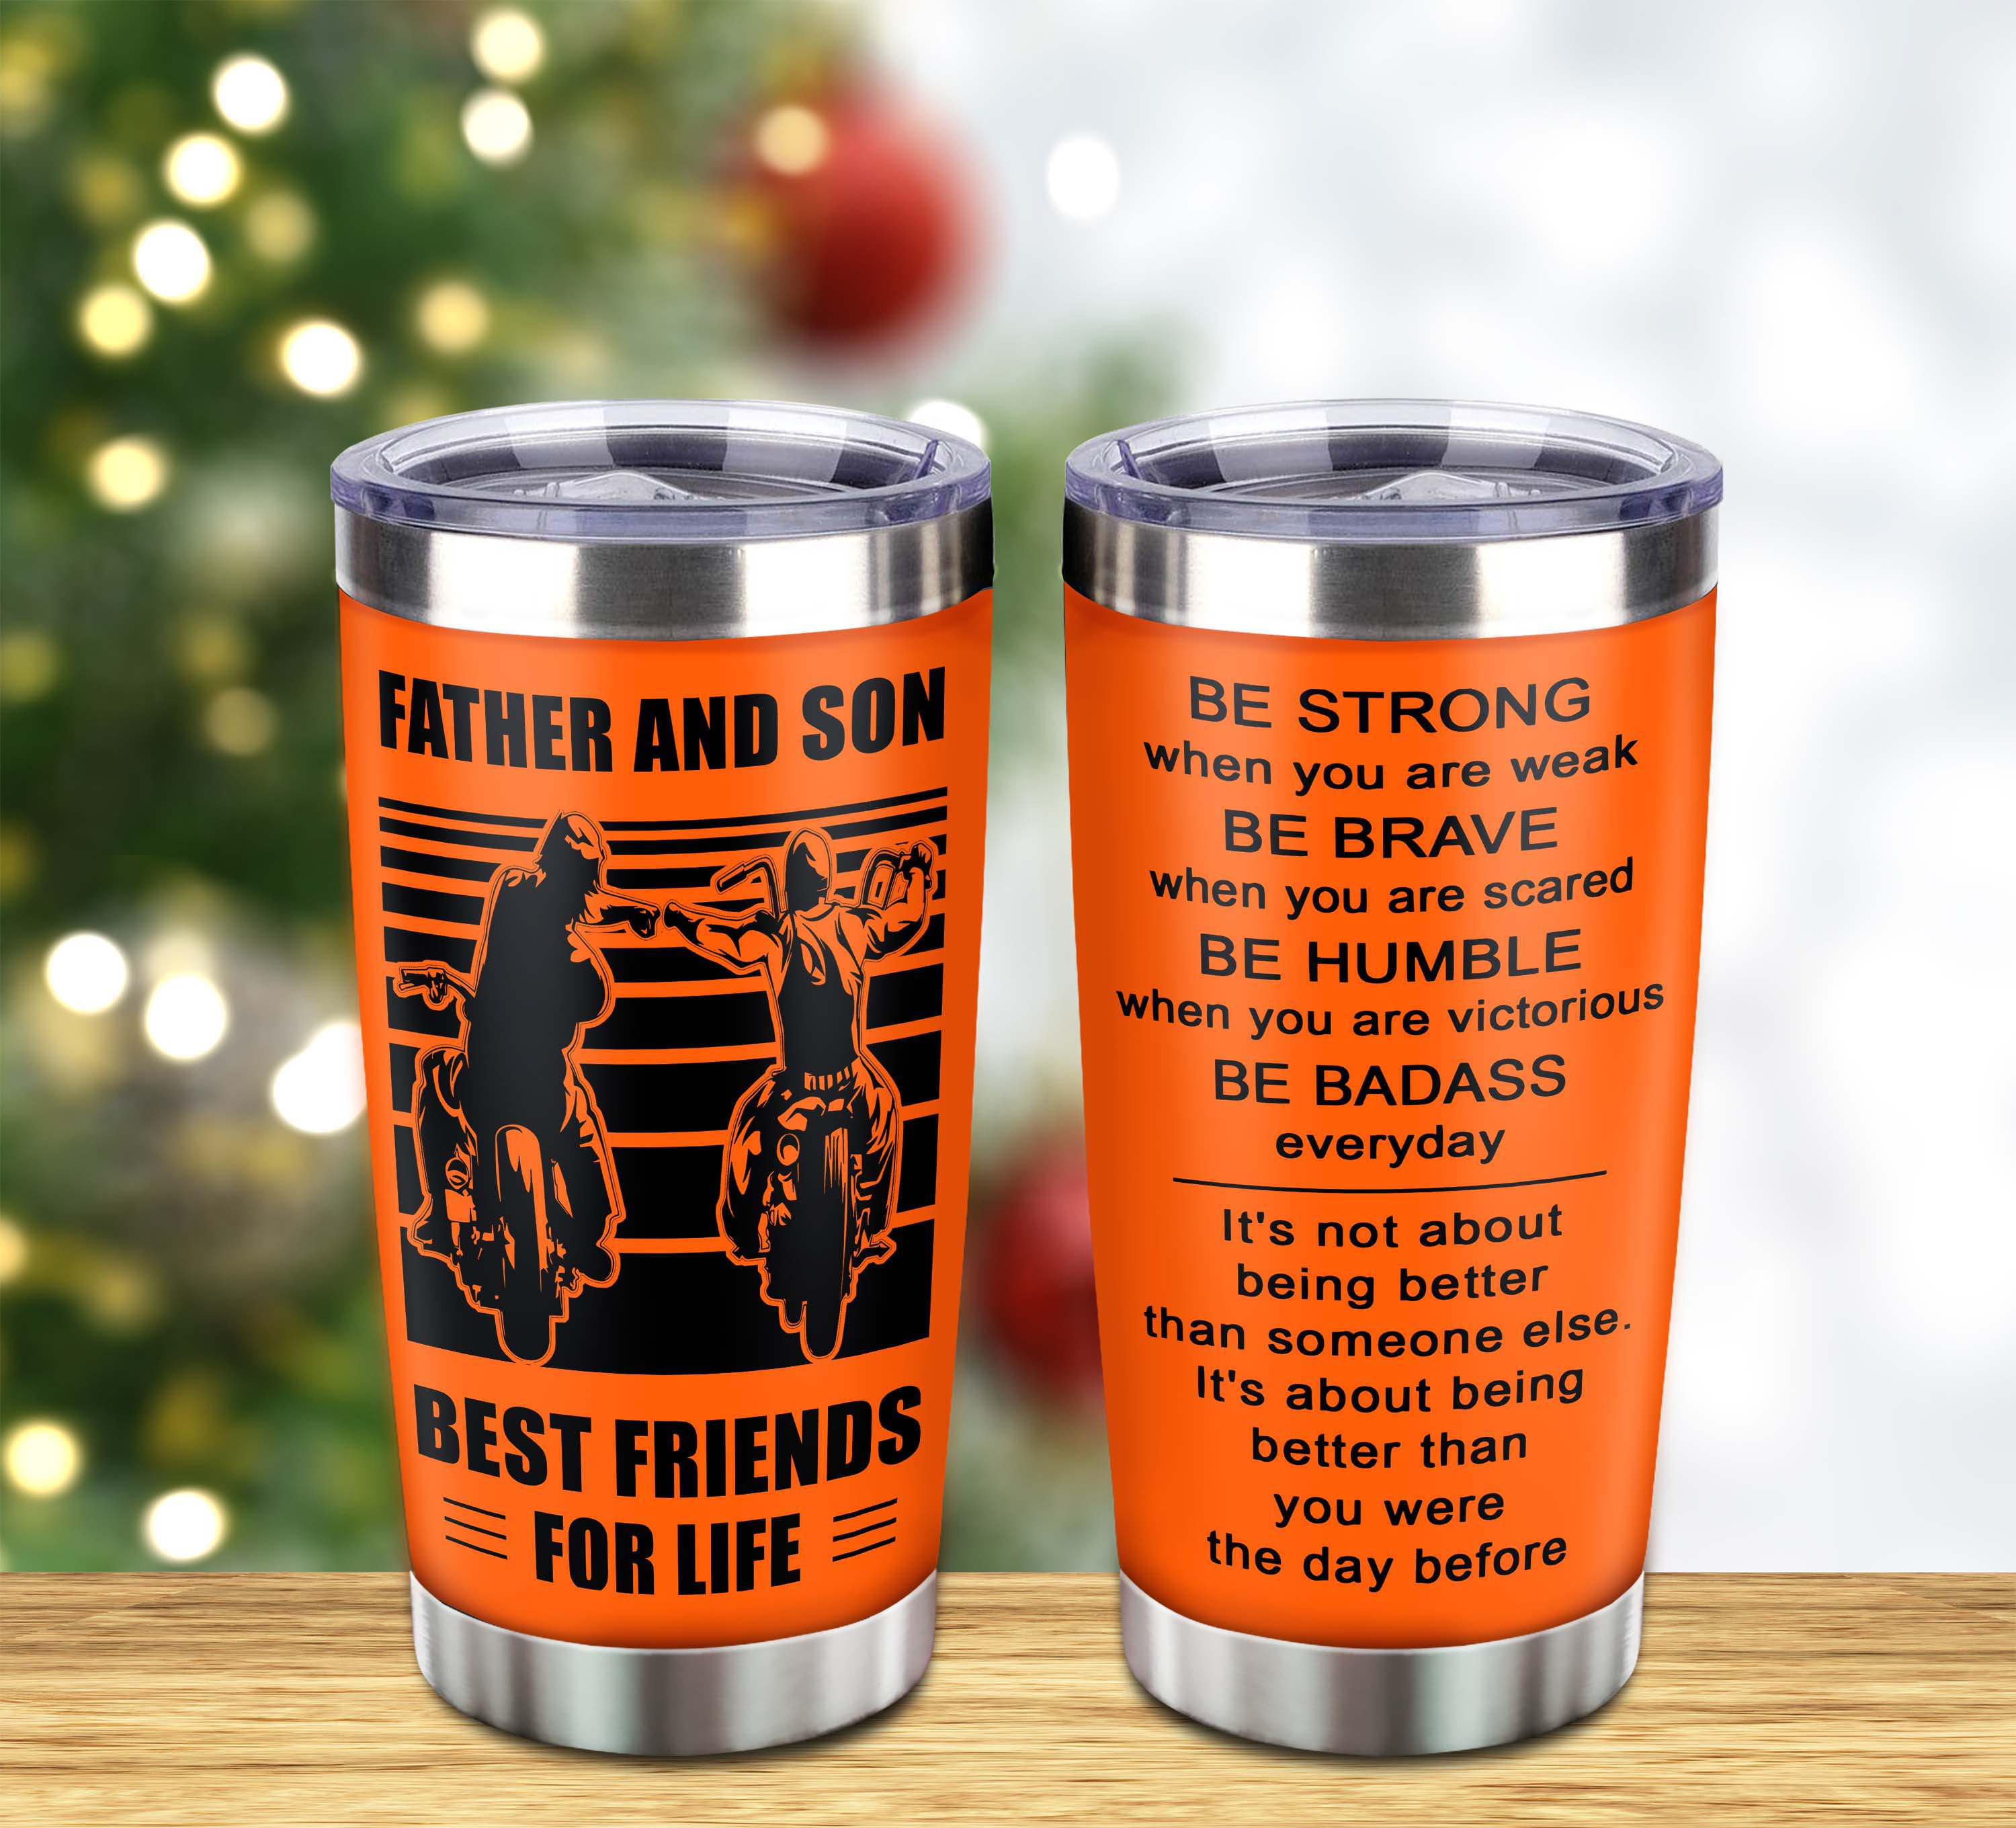 Customizable Baseball Tumbler, Gifts From Dad To Son Father And Son Best Friend For Life With Inspriration Message